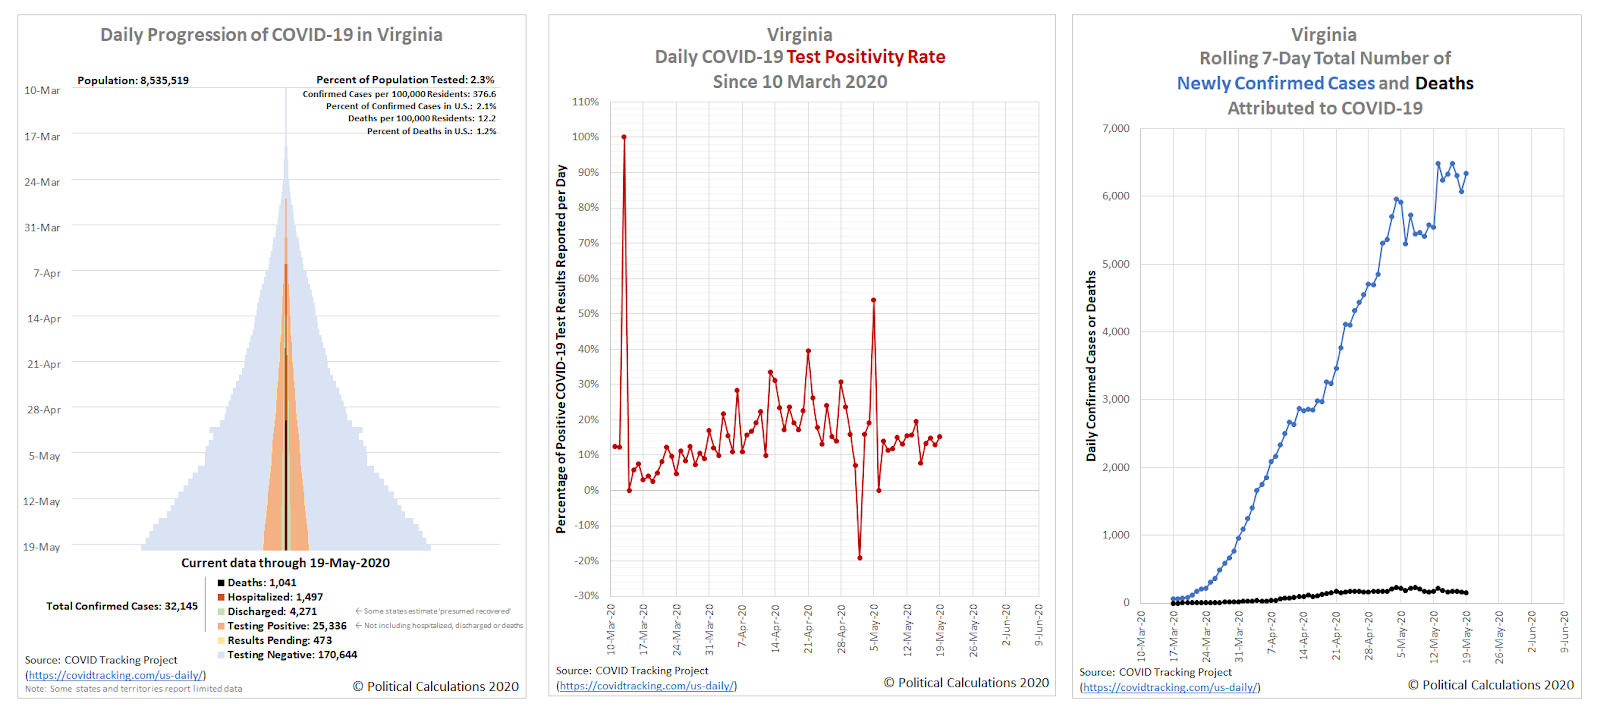 Progression of COVID-19 in Virginia, Daily Test Positivity Rate, 7-Day Total Newly Confirmed Cases and Deaths, 10 March 2020 through 19 May 2020